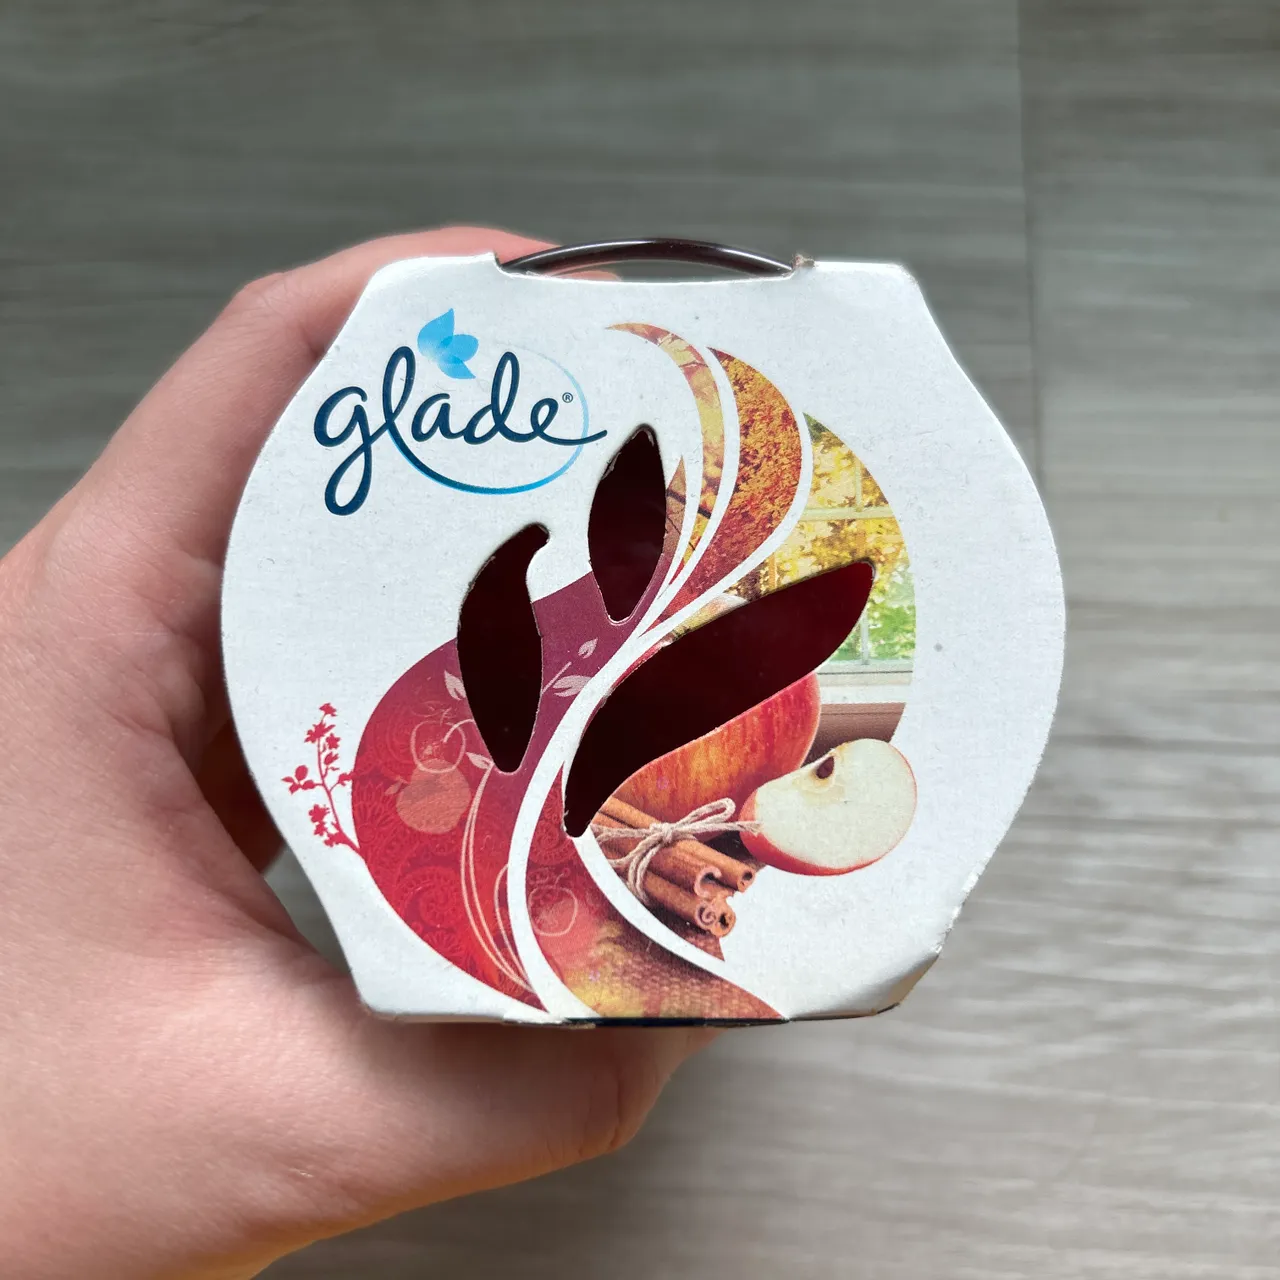 New glade candle  photo 3